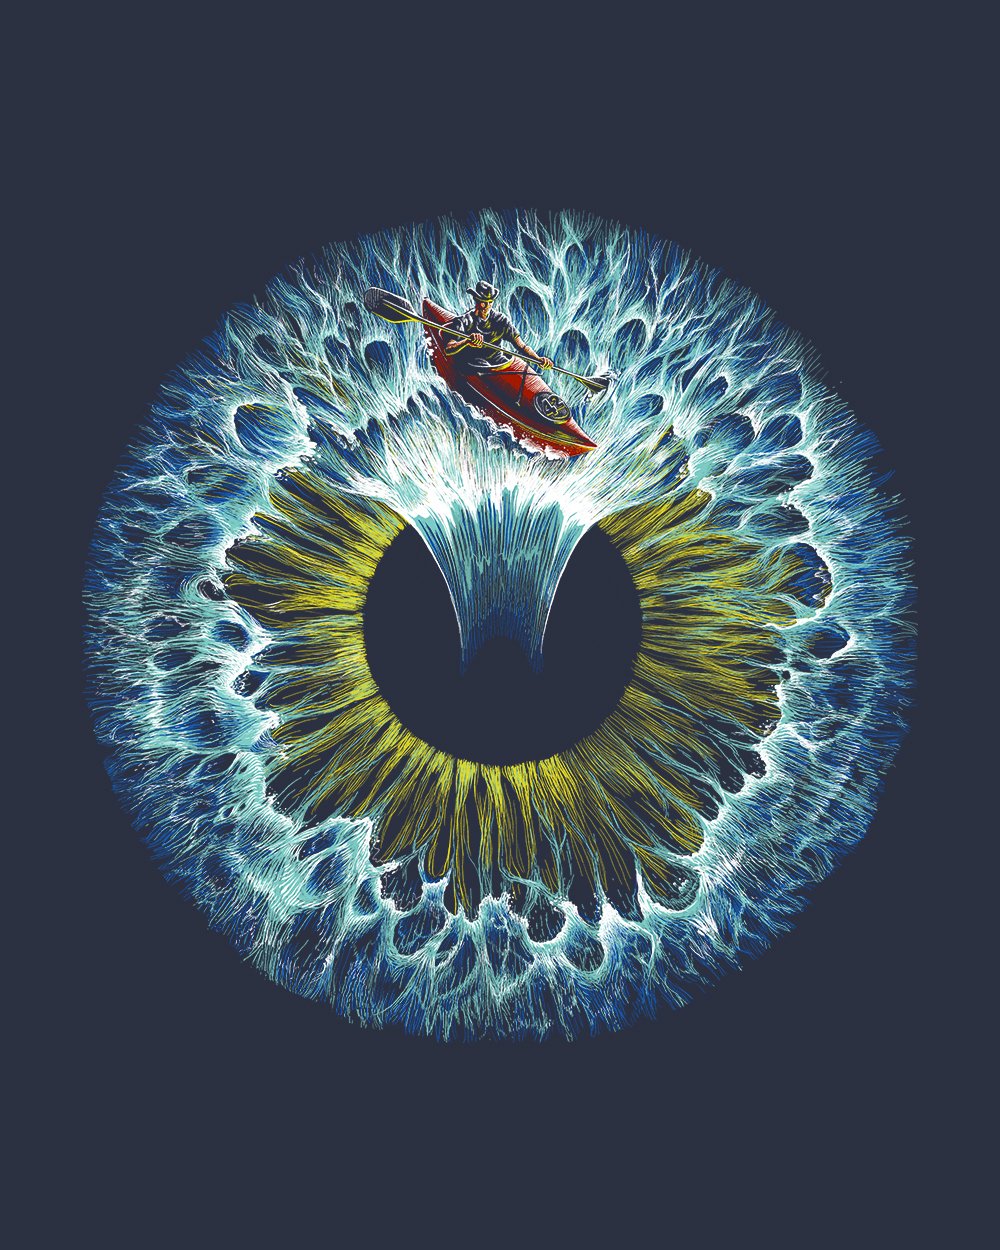 Lost in Your Eye - Aquatic T-Shirt Australia Online #colour_navy